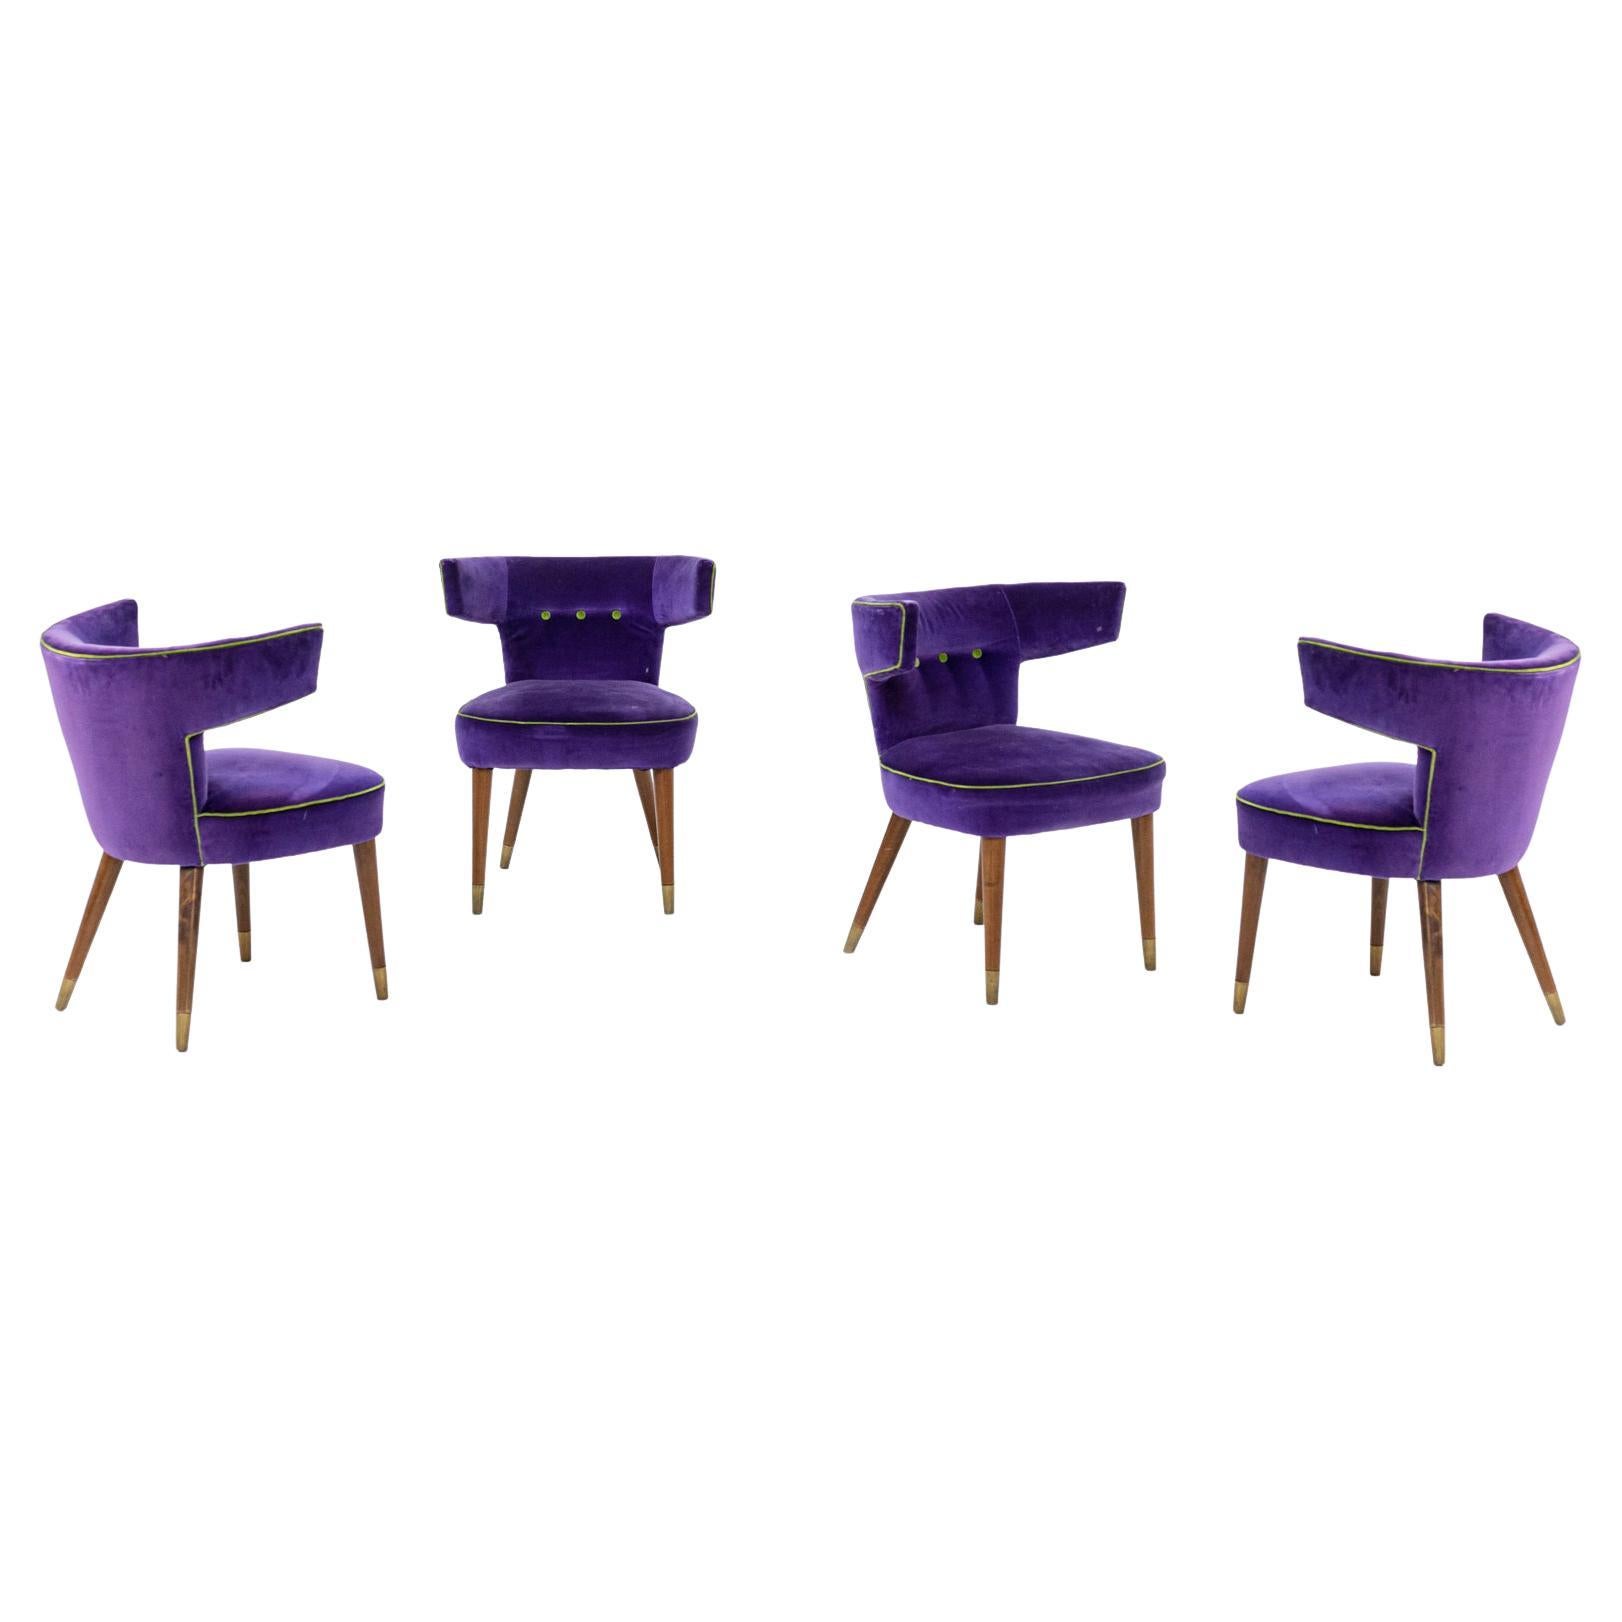 Violet Velvet Armchairs by Gio Ponti and Nino Zoncada for Cassina